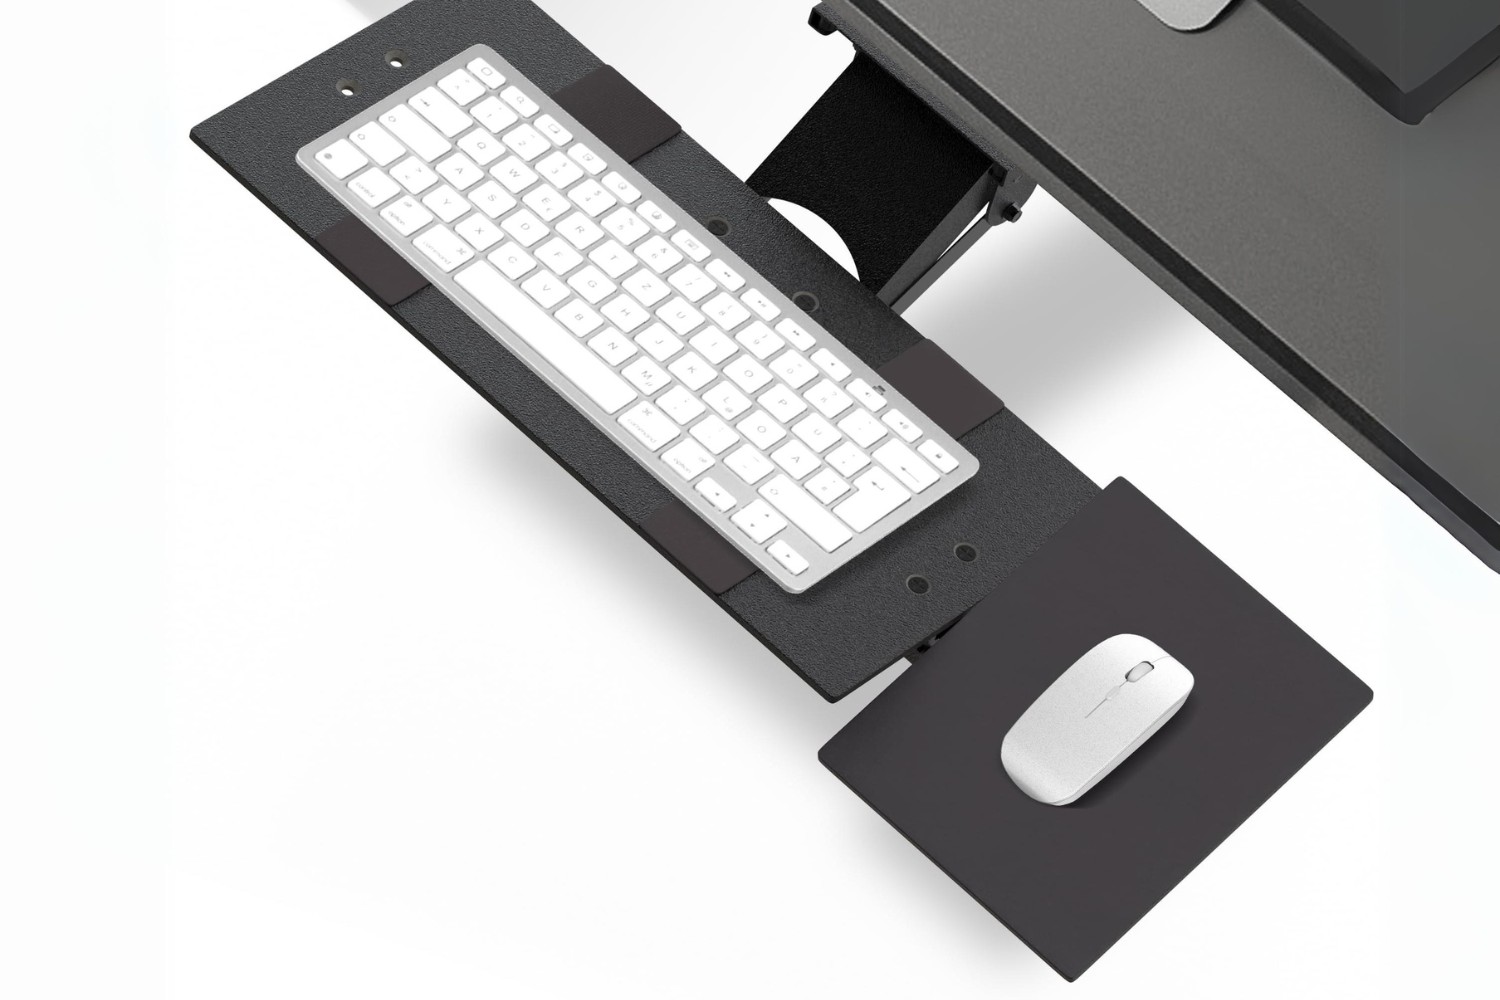 Adjustable Keyboard Tray With Mouse Pad – How Do I Set The Mouse Pad Angle